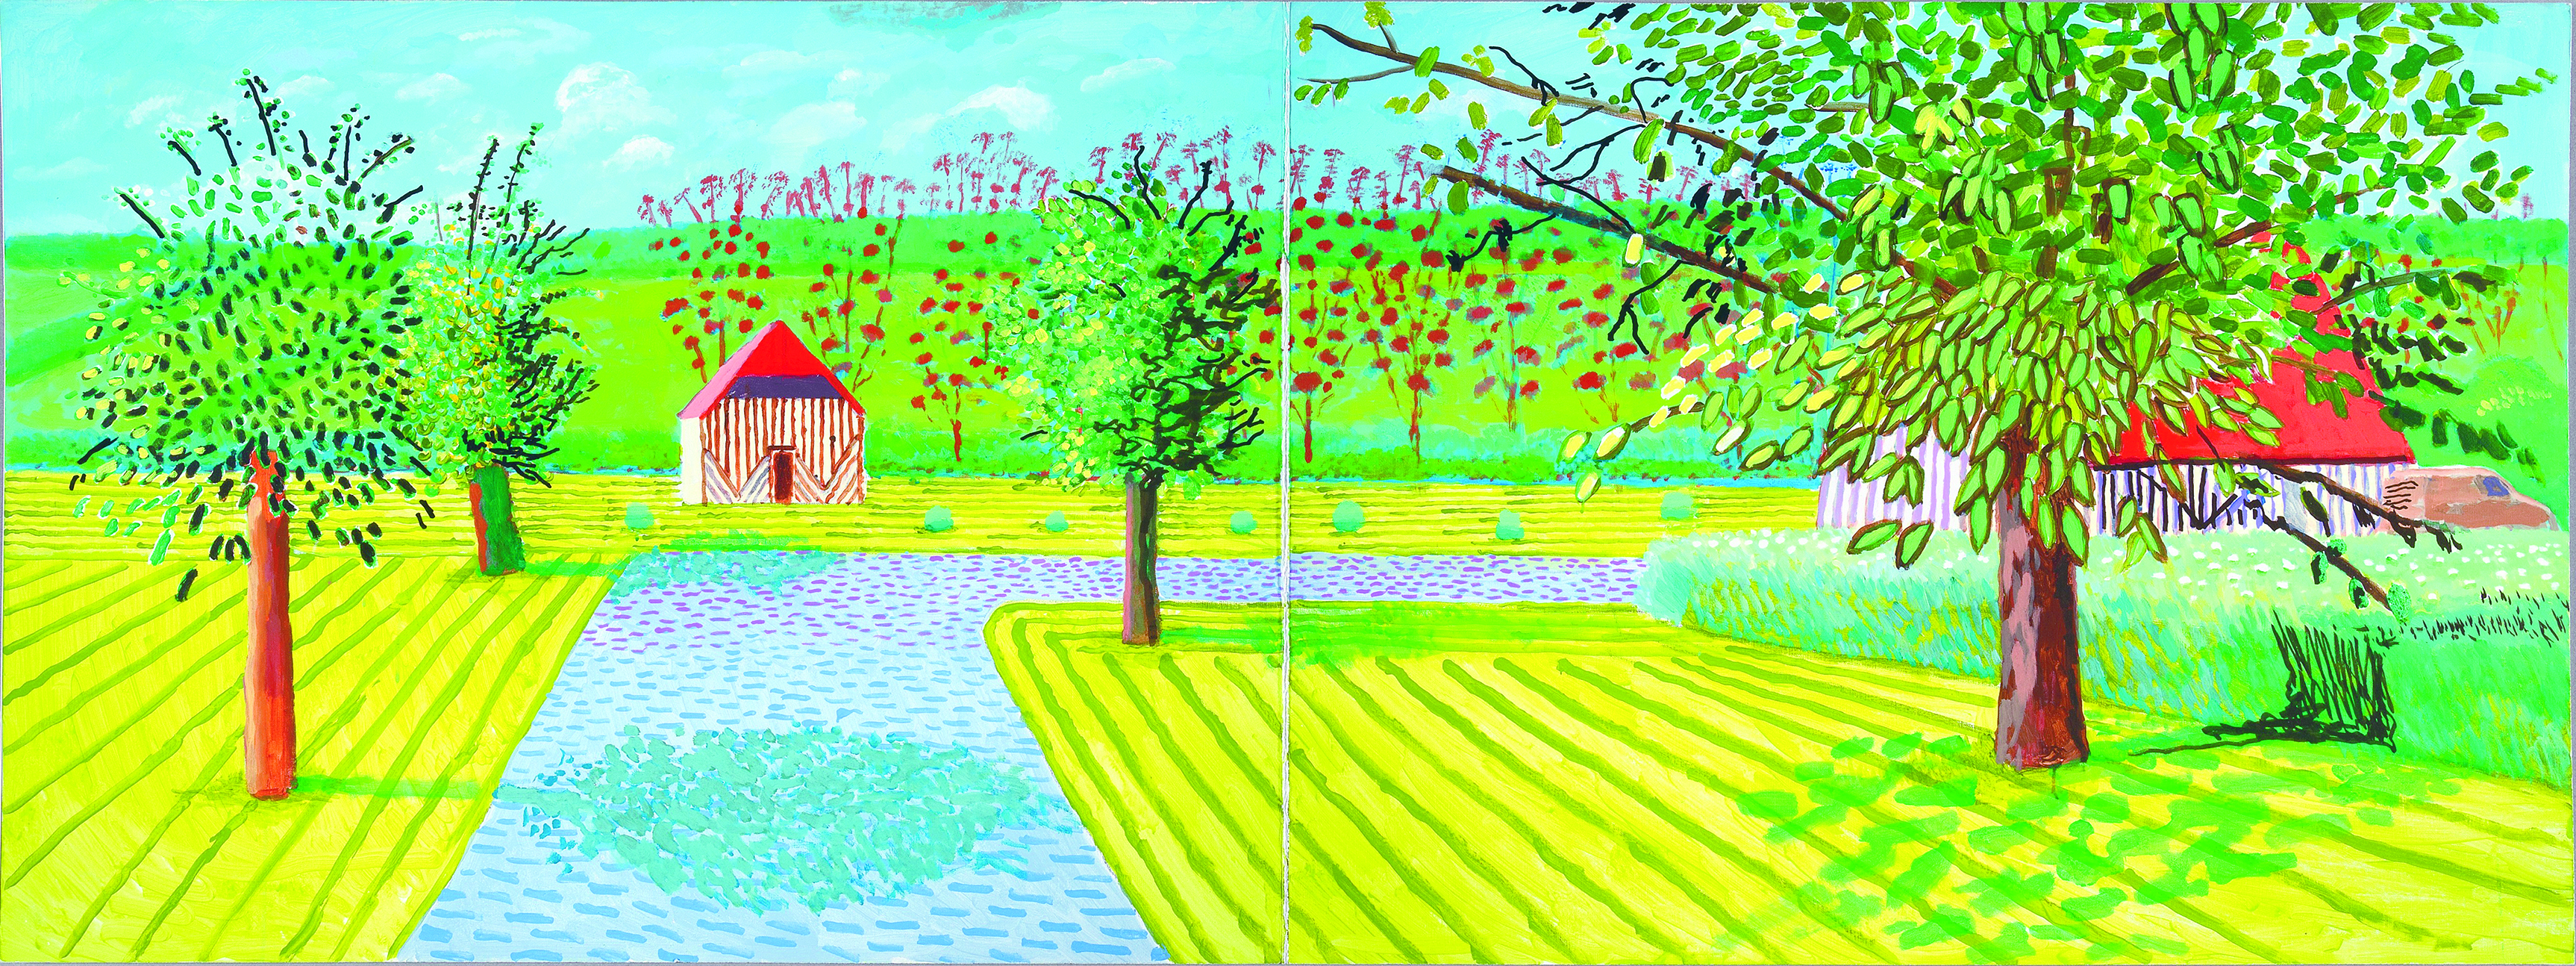 Page 32-33: David Hockney, “The Entrance”, 2019 Acrylic on 2 canvases (36 x 48' each) 36 x 96' overall © David Hockney Photo Credit: Richard Schmidt